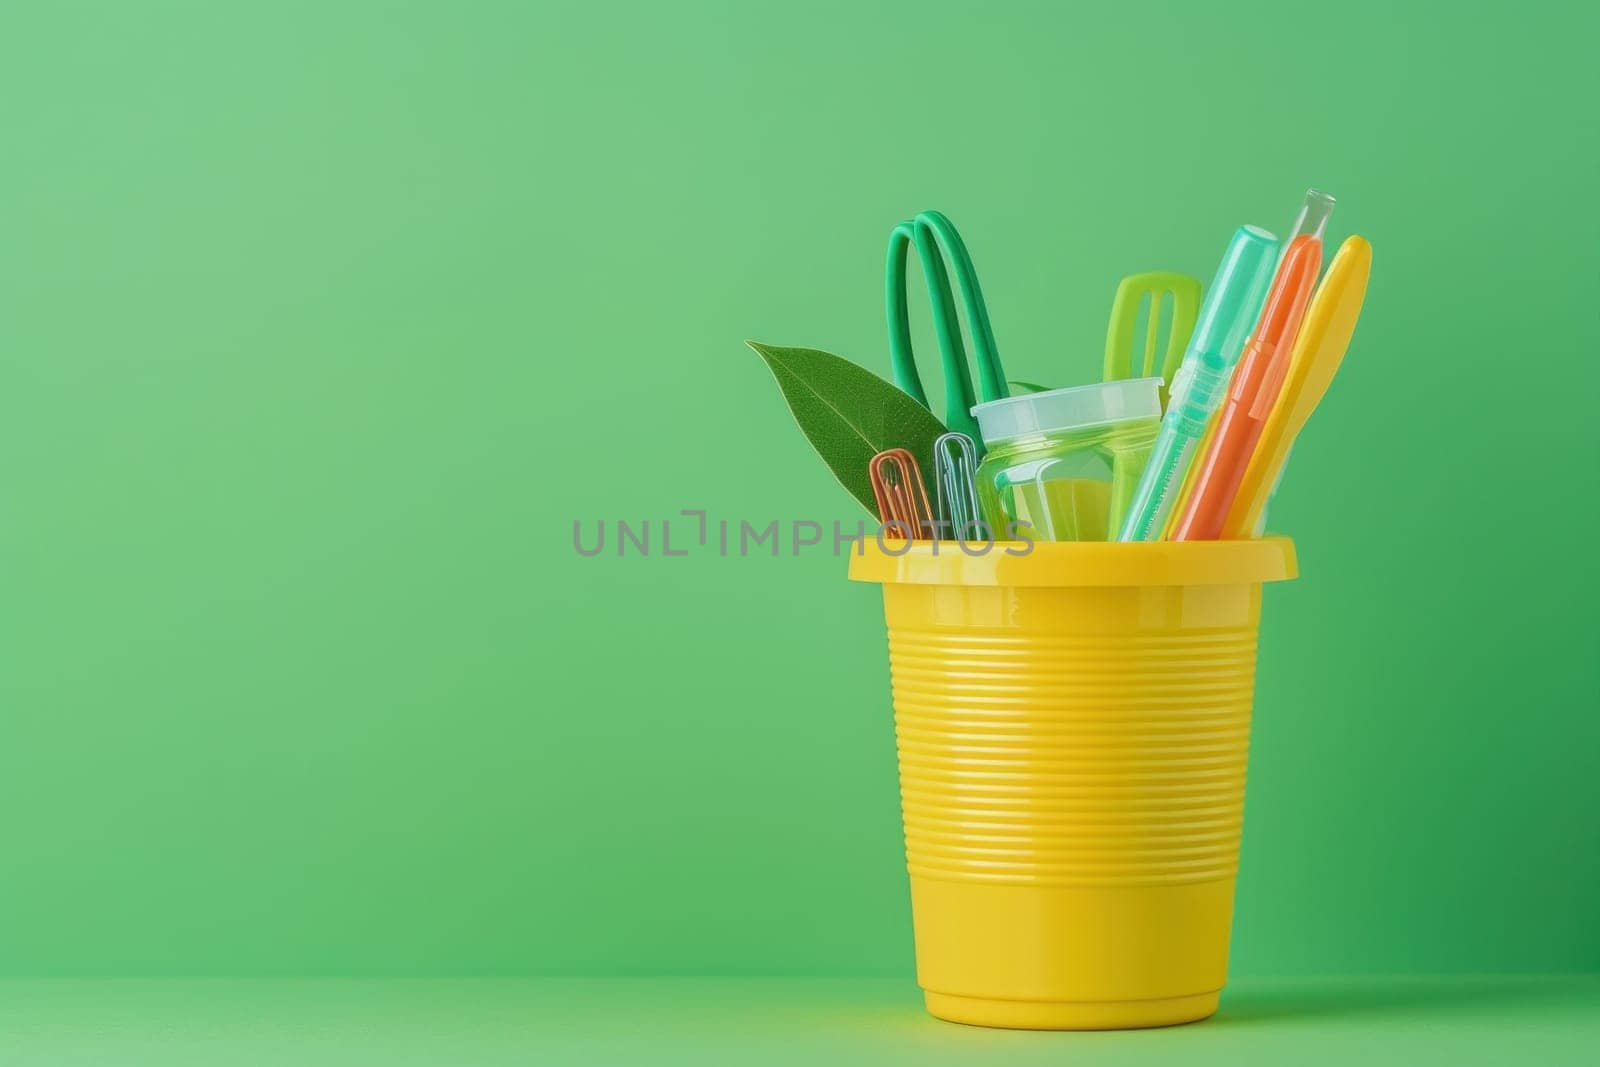 Disposable picnic utensils arranged with a yellow plastic cup on a vibrant green background, perfect for summer travel outings